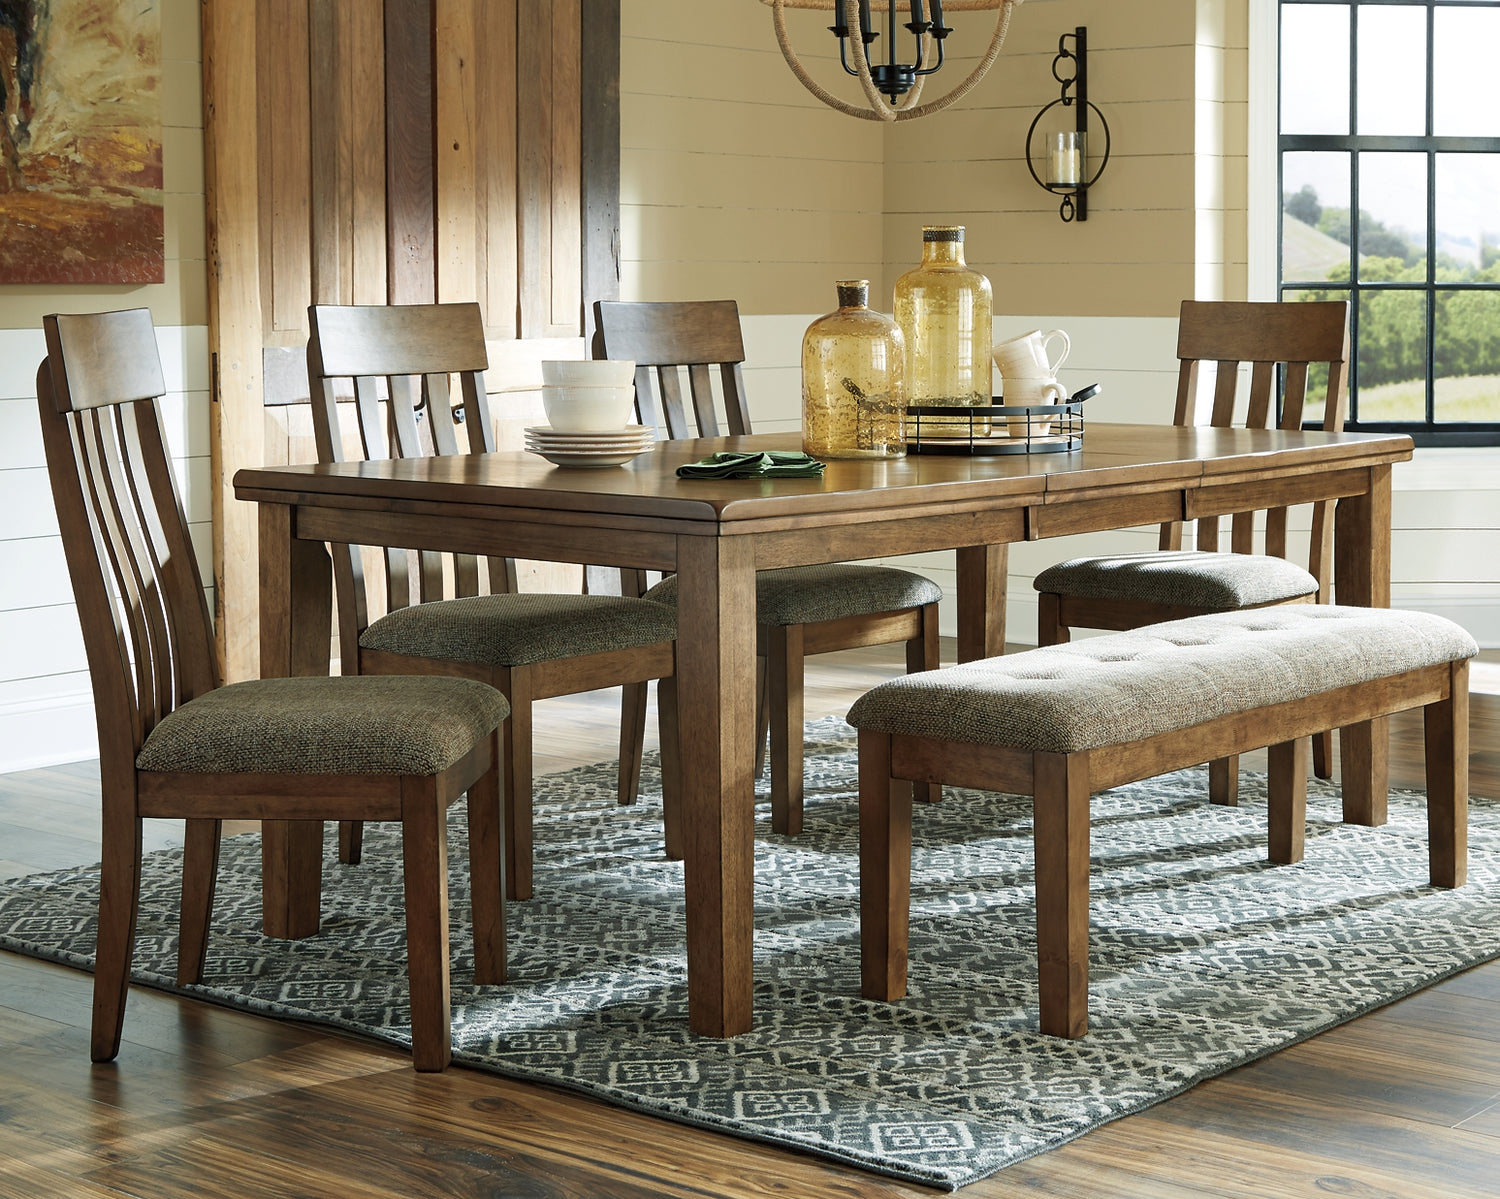 Dining Room > Dining Room Groups